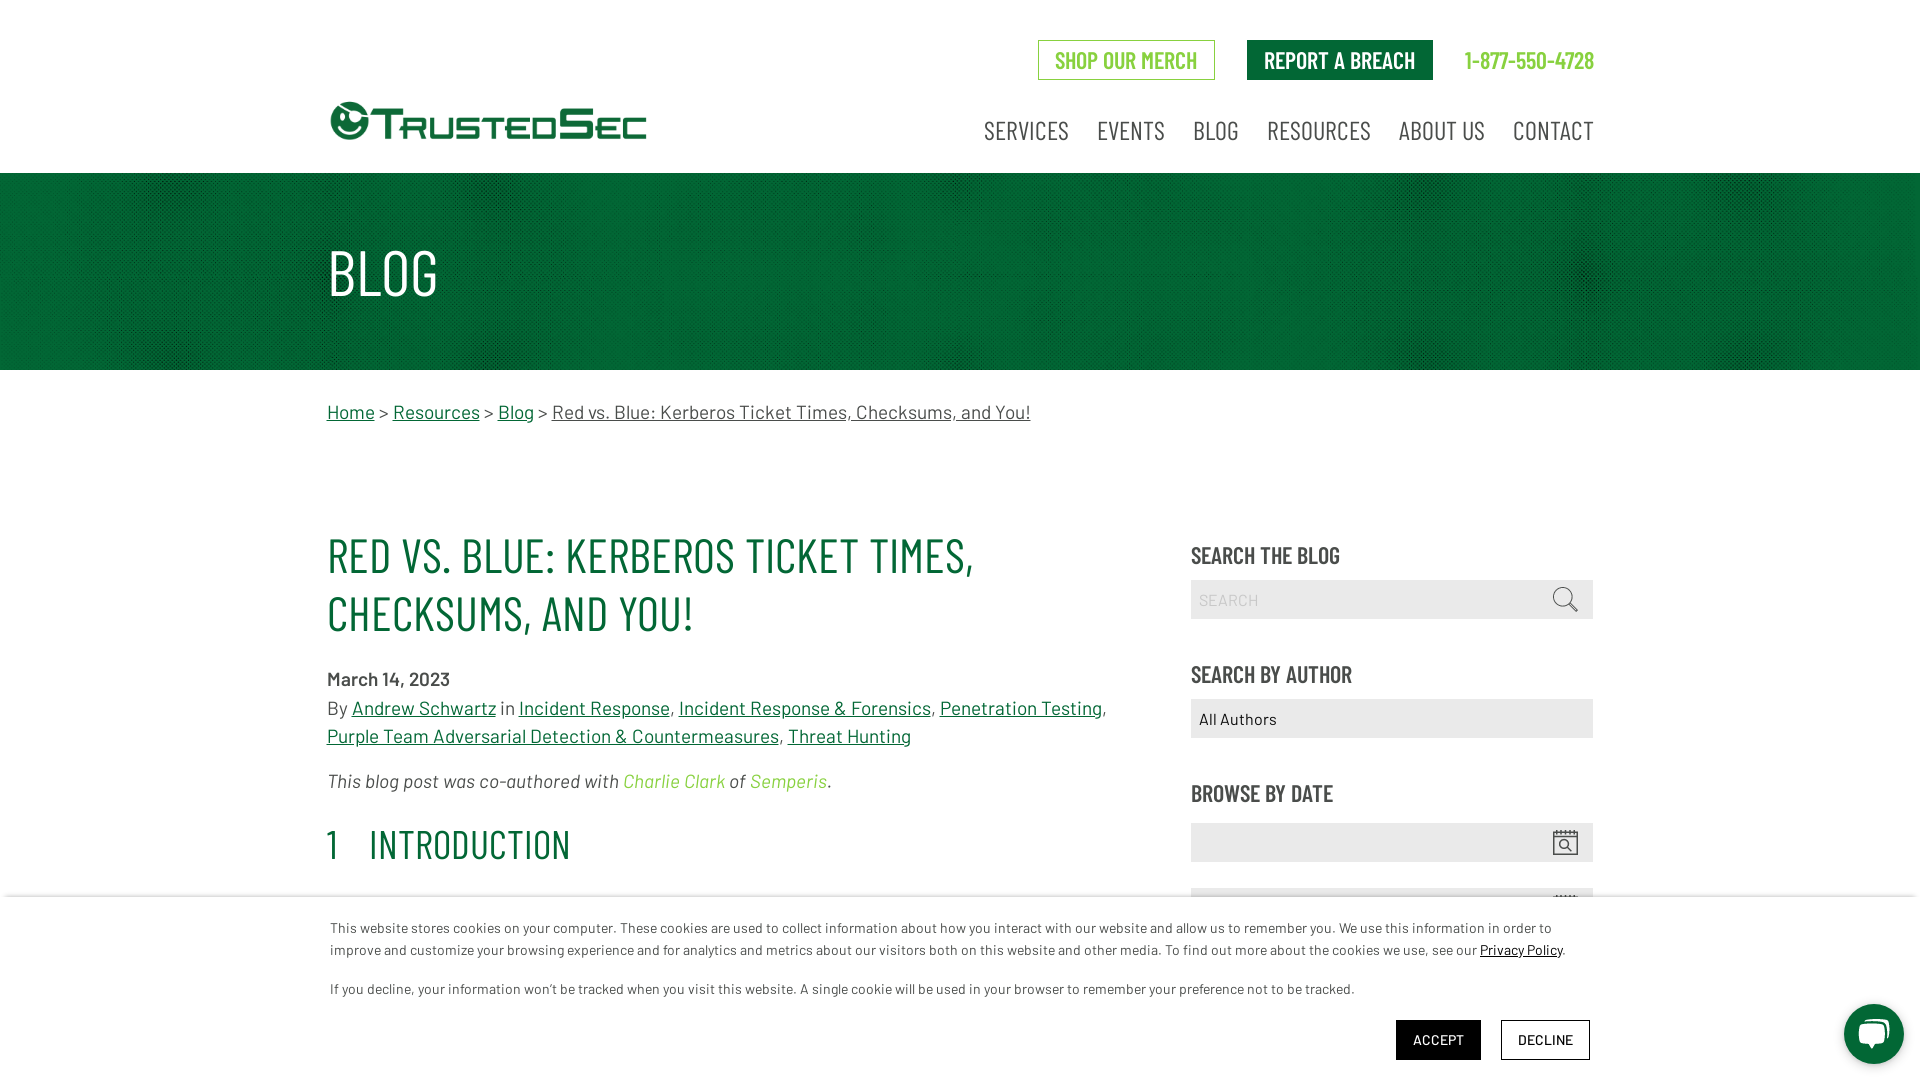 Red vs. Blue: Kerberos Ticket Times, Checksums, and You! - TrustedSec